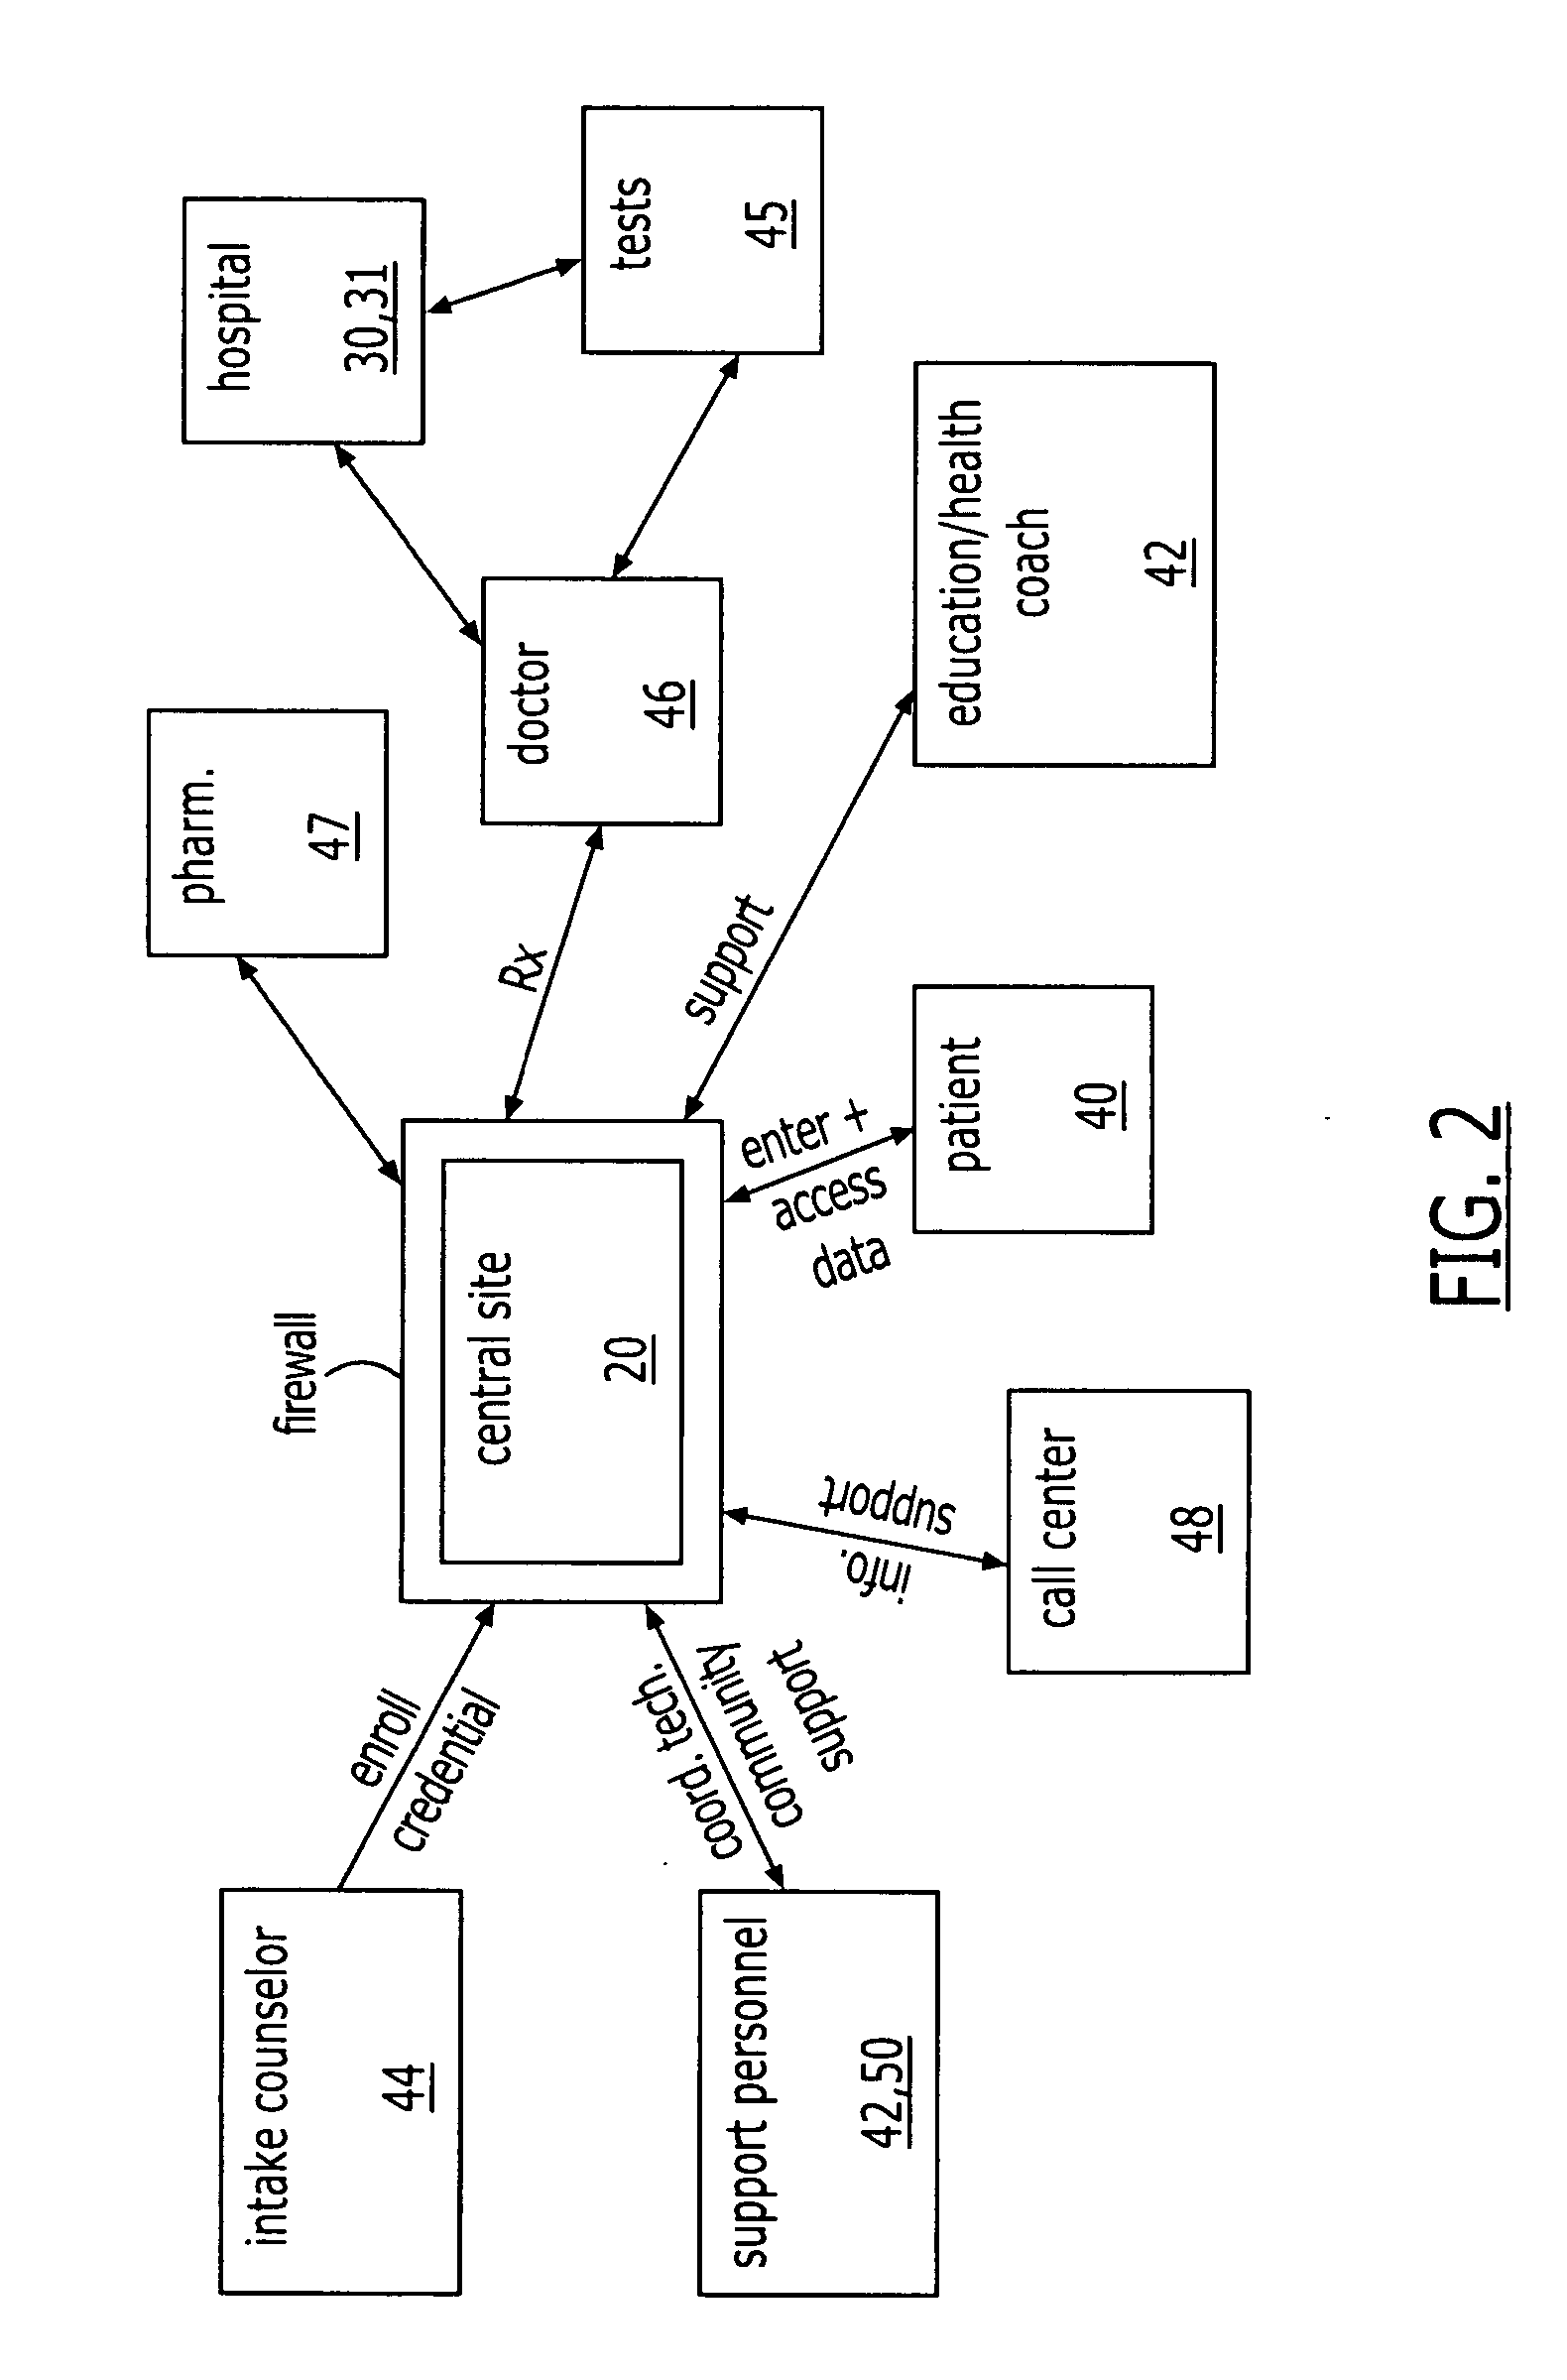 Health information database creation and secure access system and method